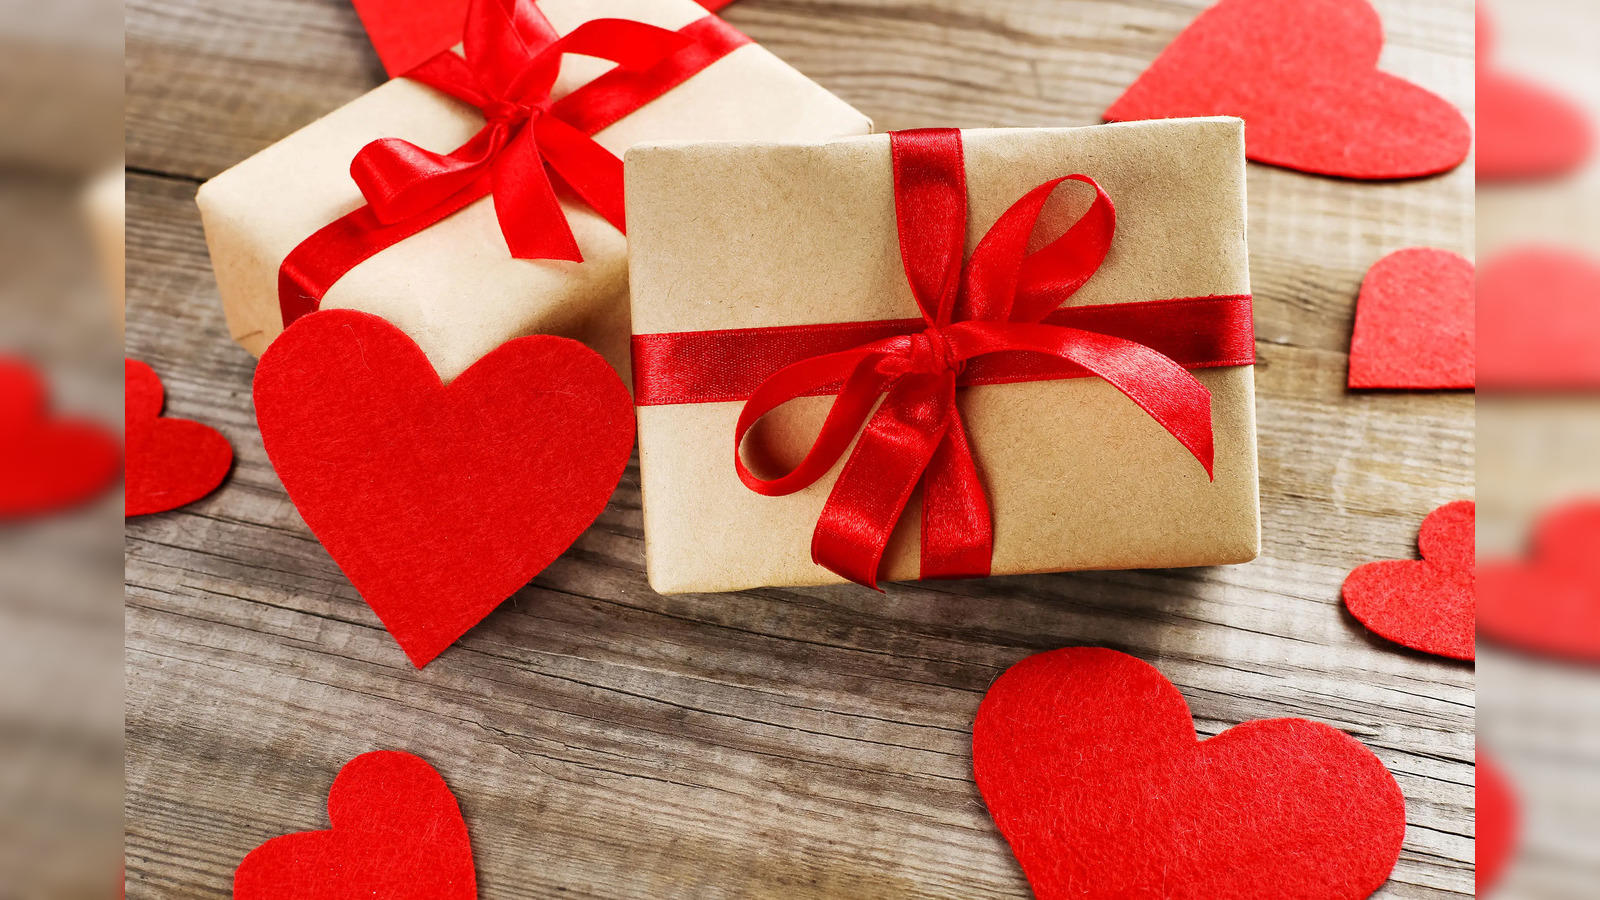 20 Simple & Last Minute Valentine's Day Gift Ideas